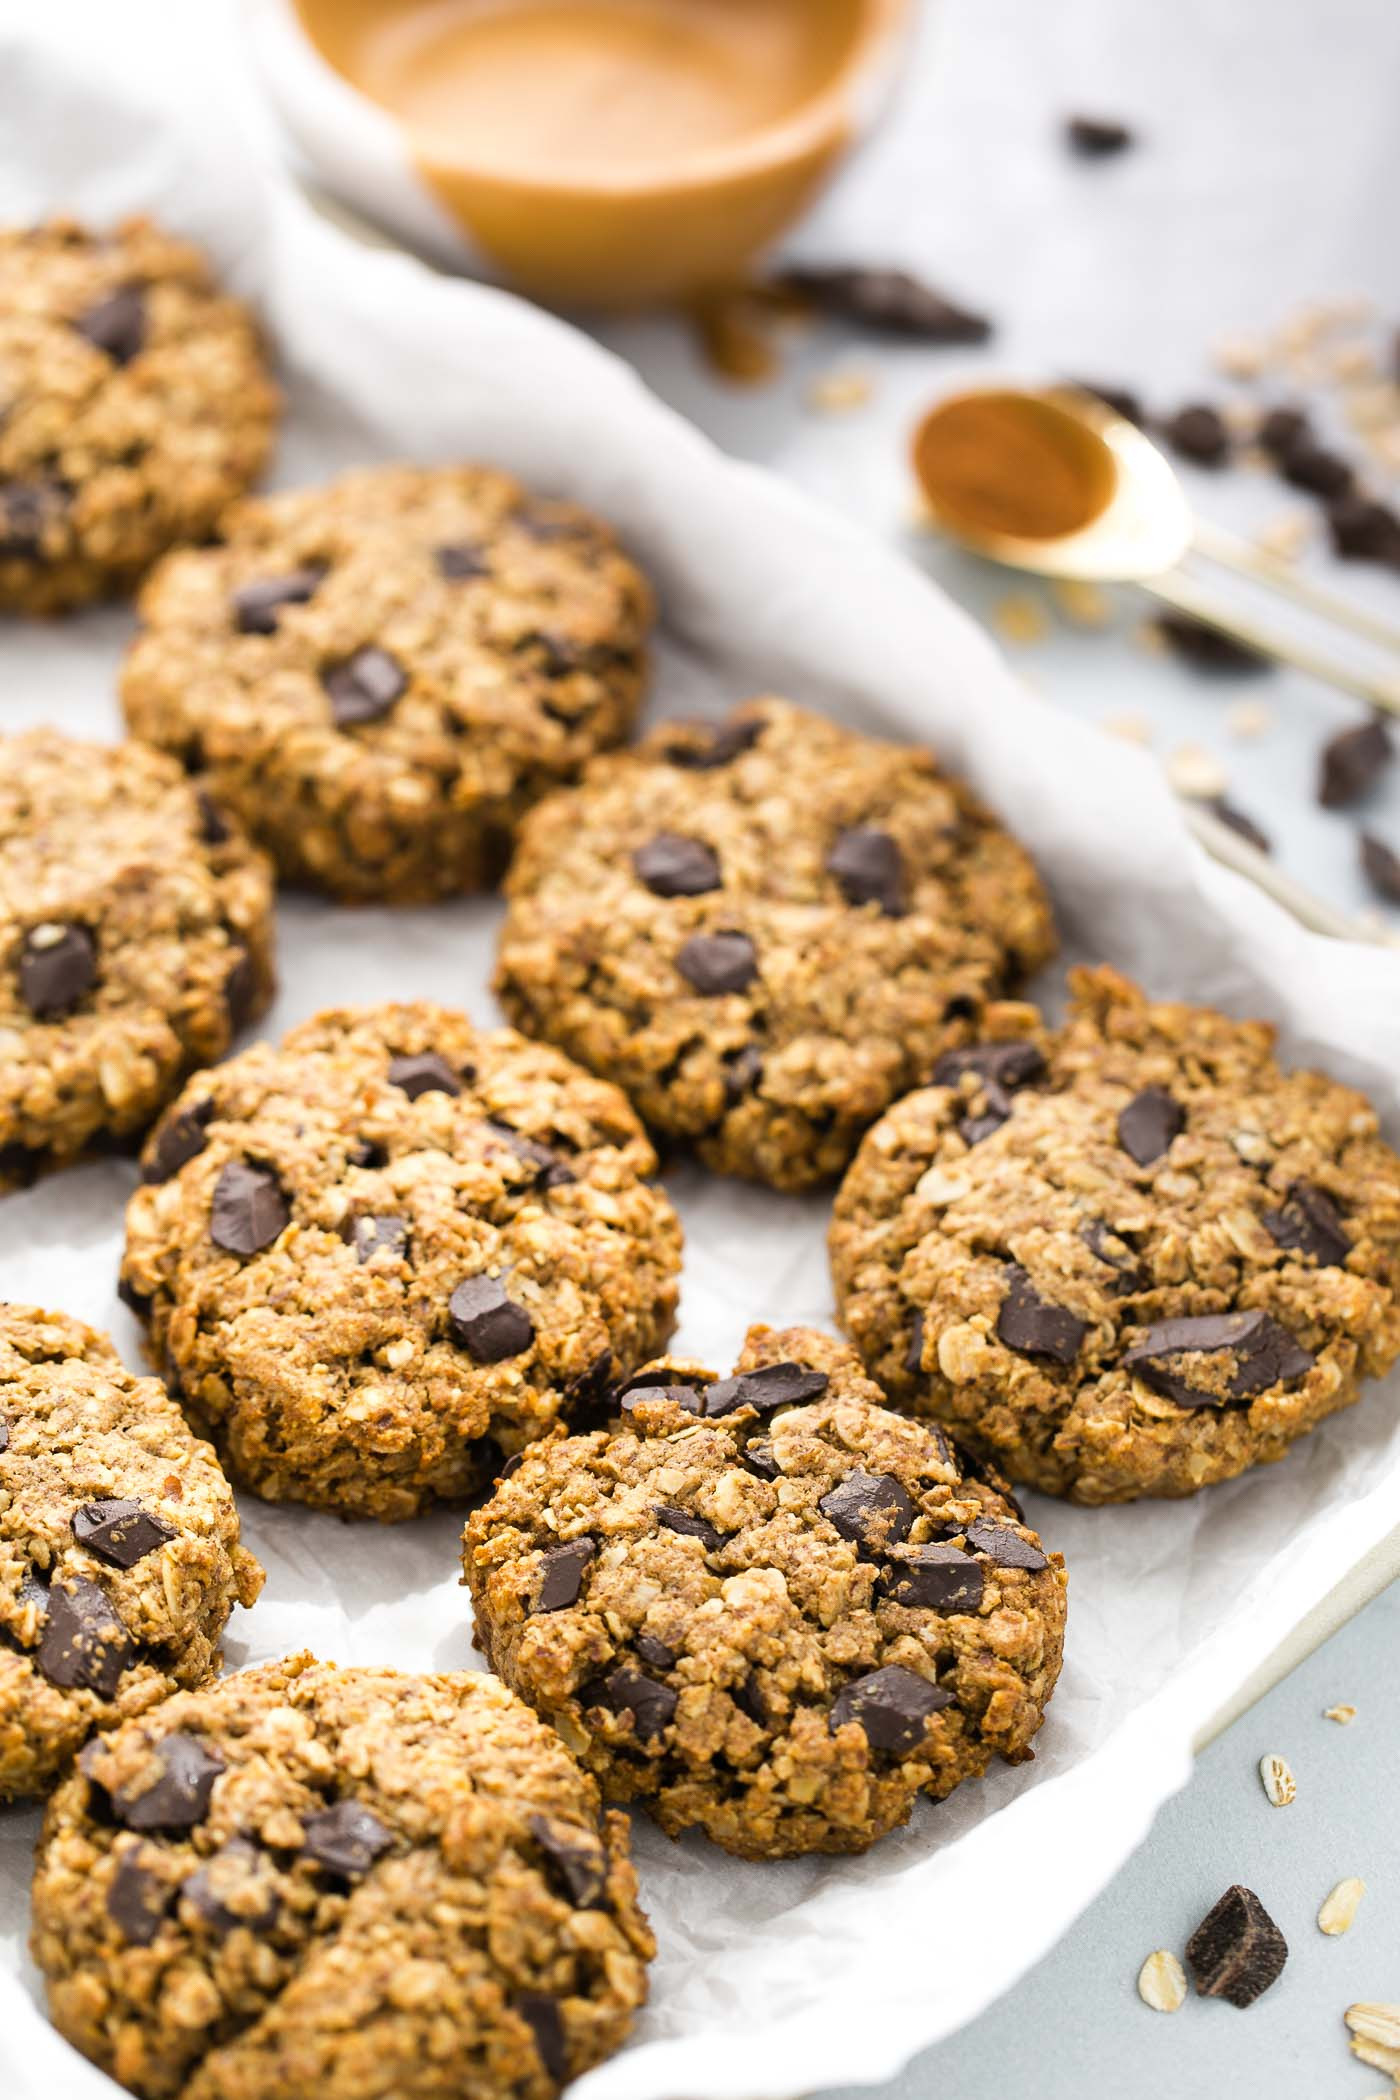 Oatmeal Peanut Butter Cookies Healthy
 healthy peanut butter oatmeal cookies